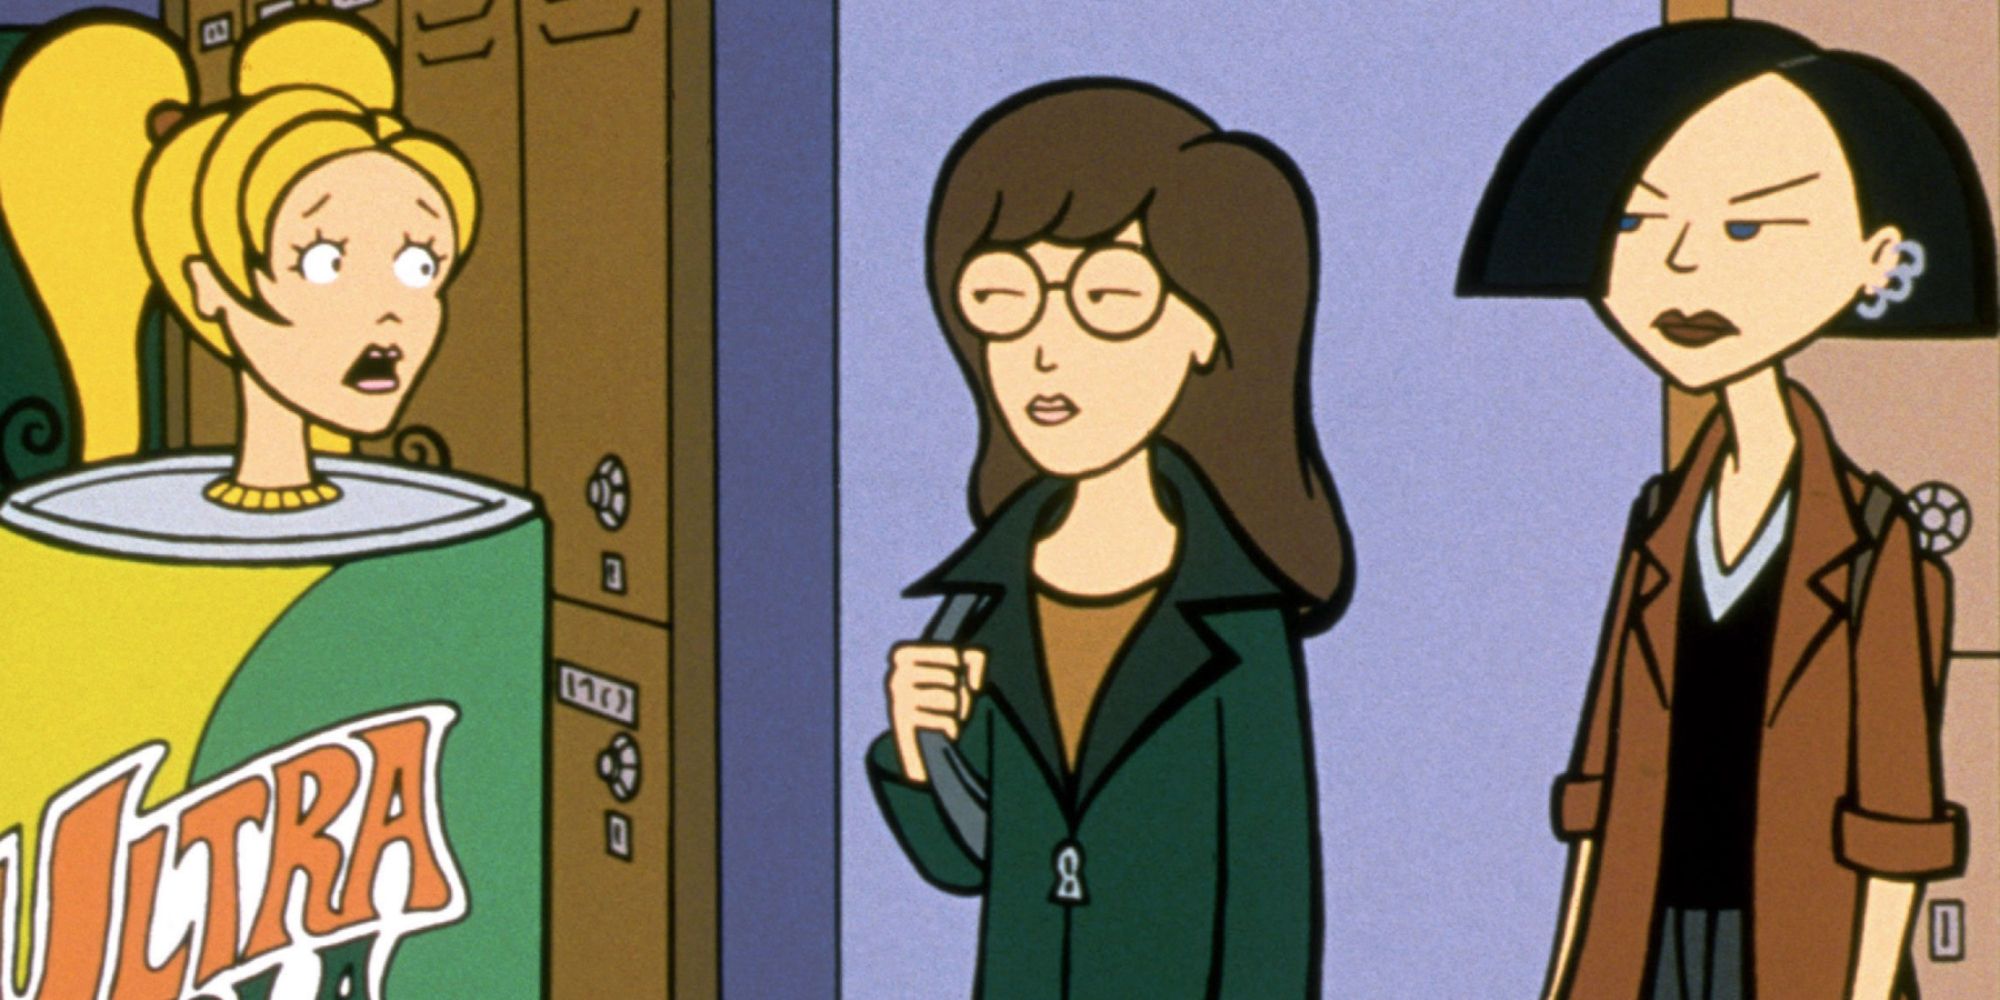 still of daria characters in high school hall